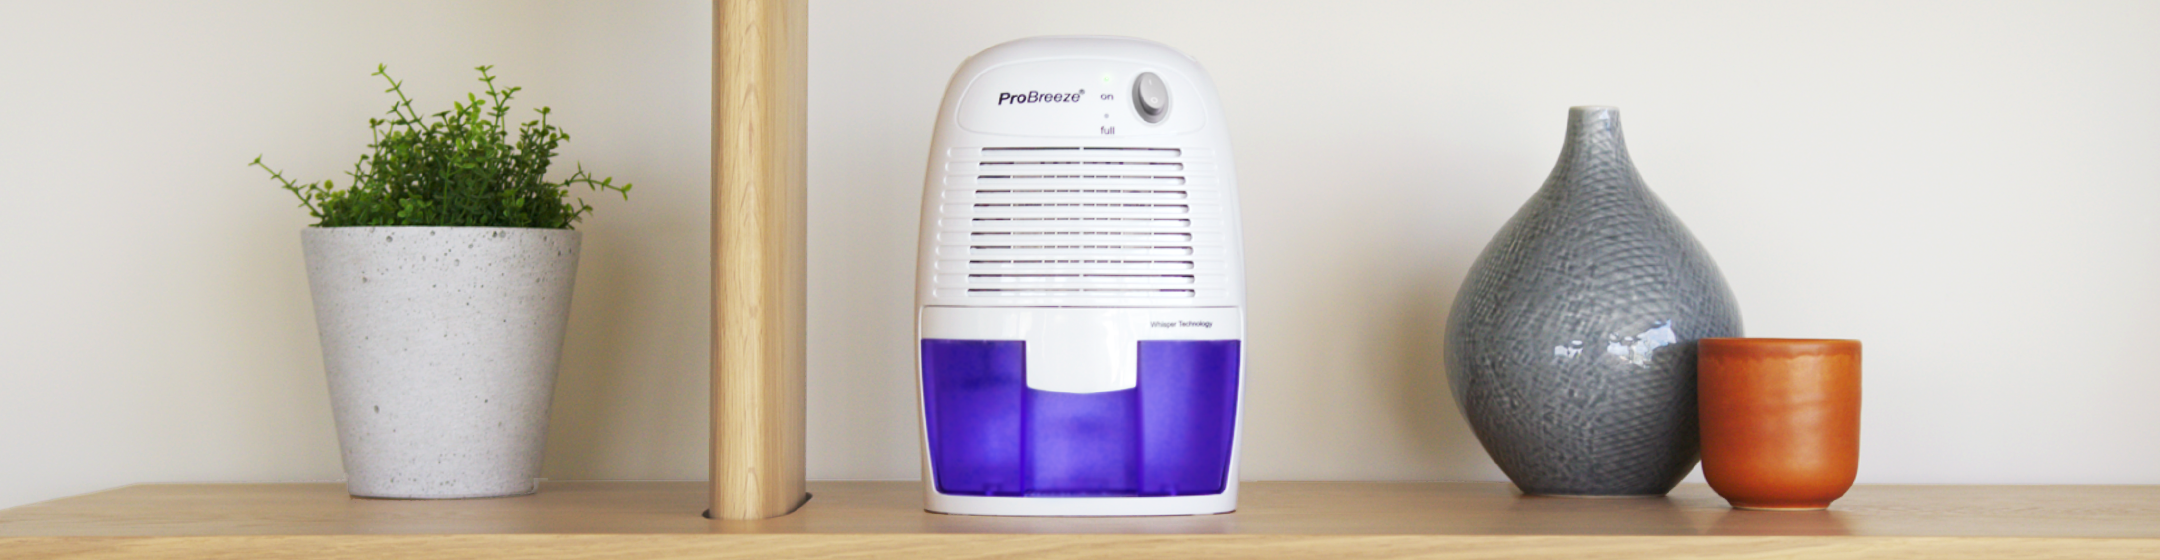 Pro Breeze Electric Mini Dehumidifier, 1200 Cubic Feet (150 sq ft), Compact  and Portable for High